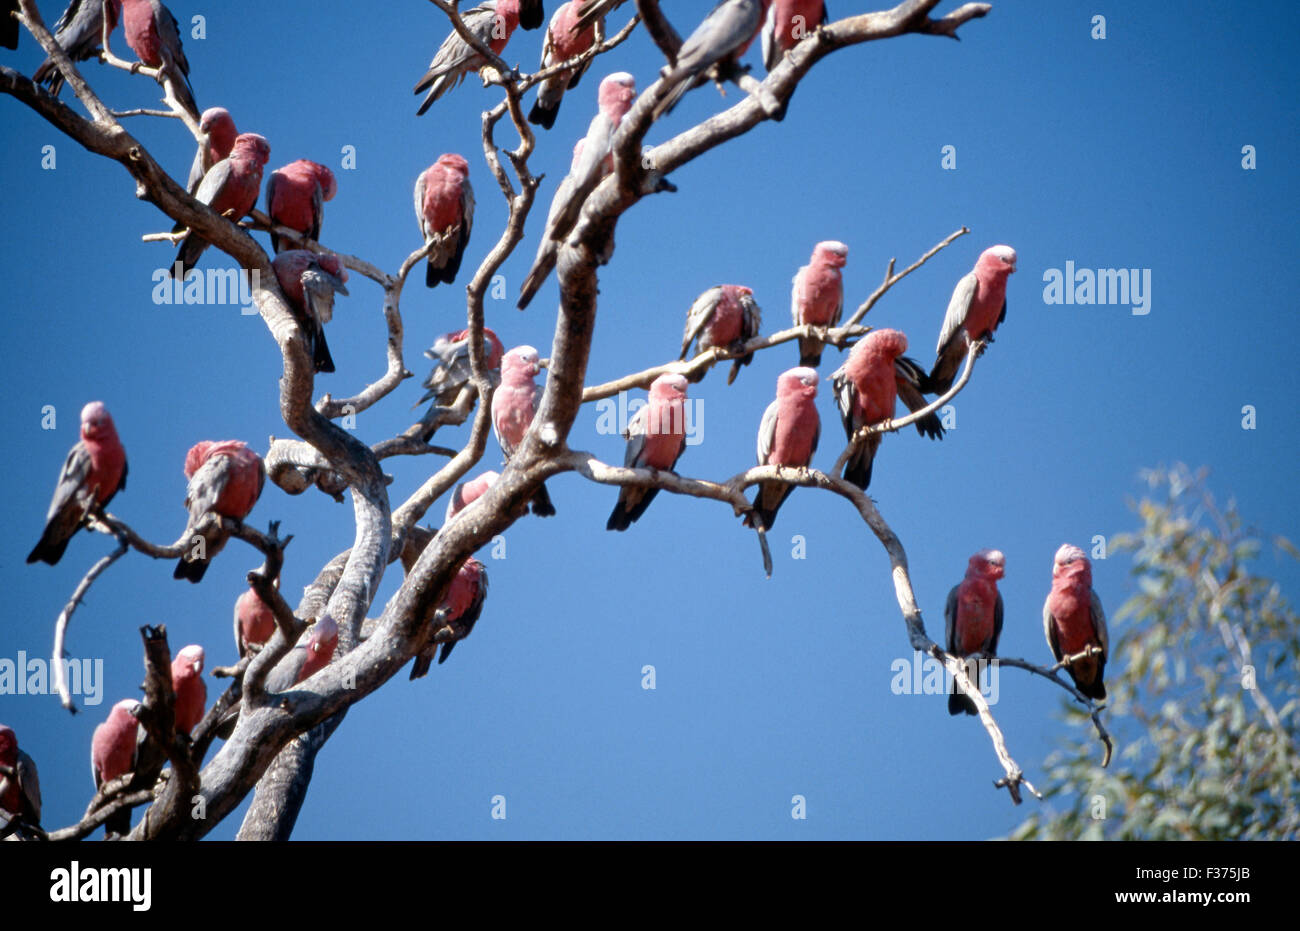 FLOCKS OF GALAHS (CACATUA ROSEICAPILLA) ROOSTING IN TALL TREES ARE A FAMILIAR SIGHT IN CENTRAL AUSTRALIA. Stock Photo